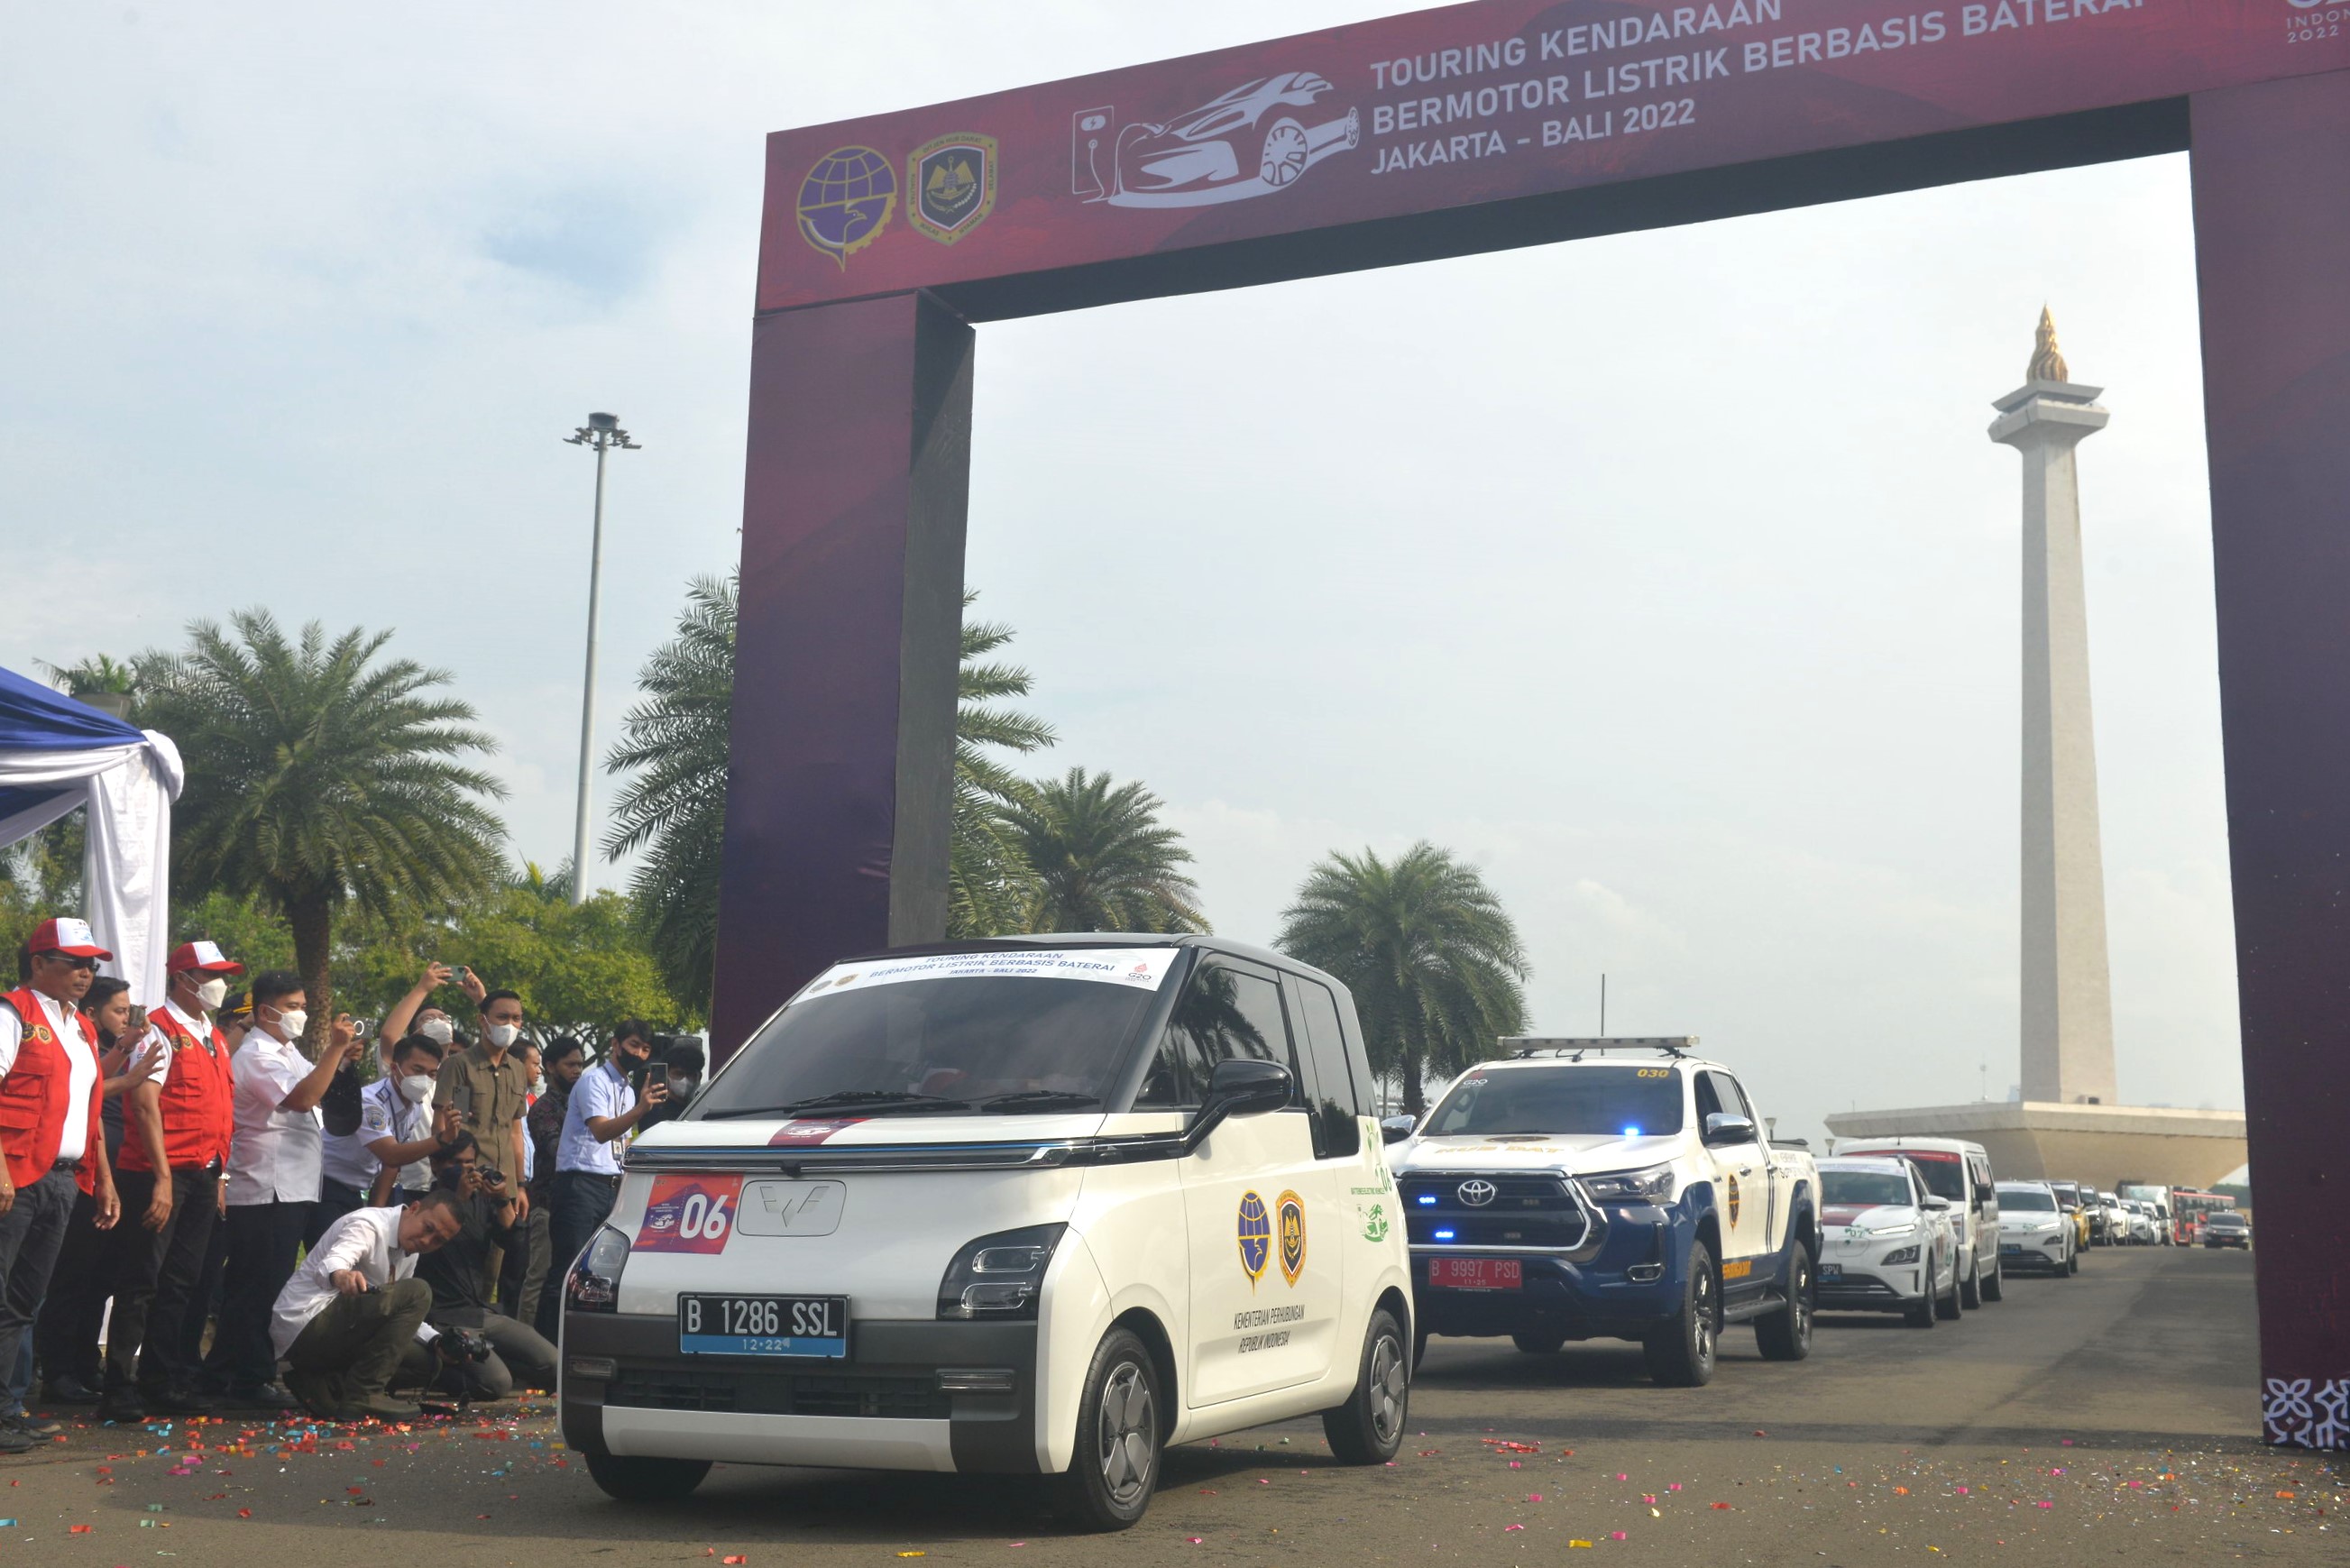 Image Wuling Participates in Battery-Based Electric Motor Vehicle Touring Jakarta-Bali 2022